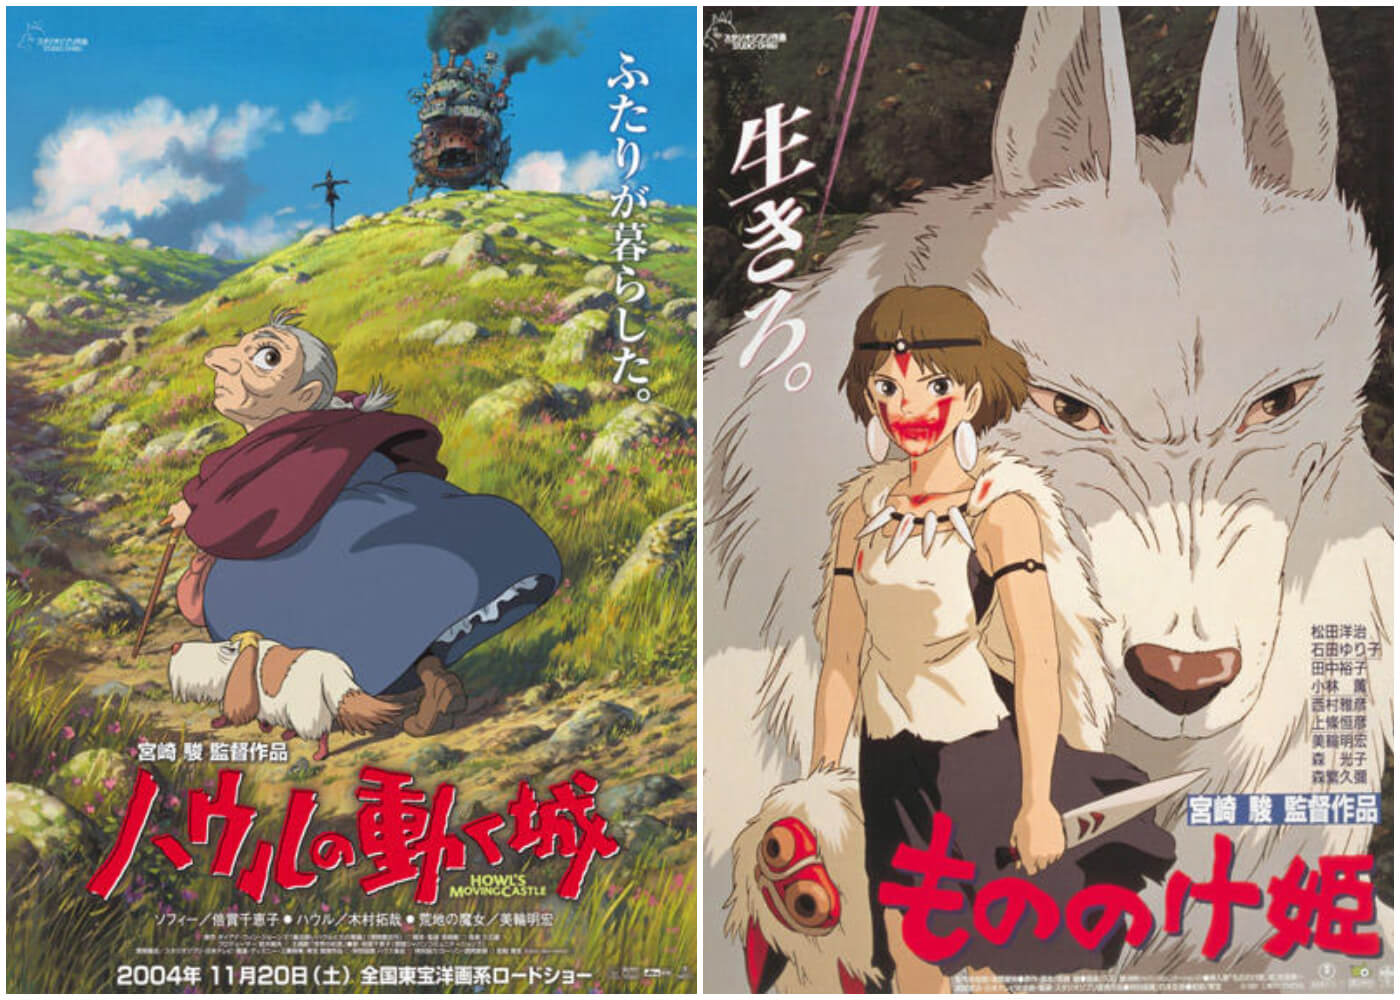 studio ghibli free images - possible upcoming images